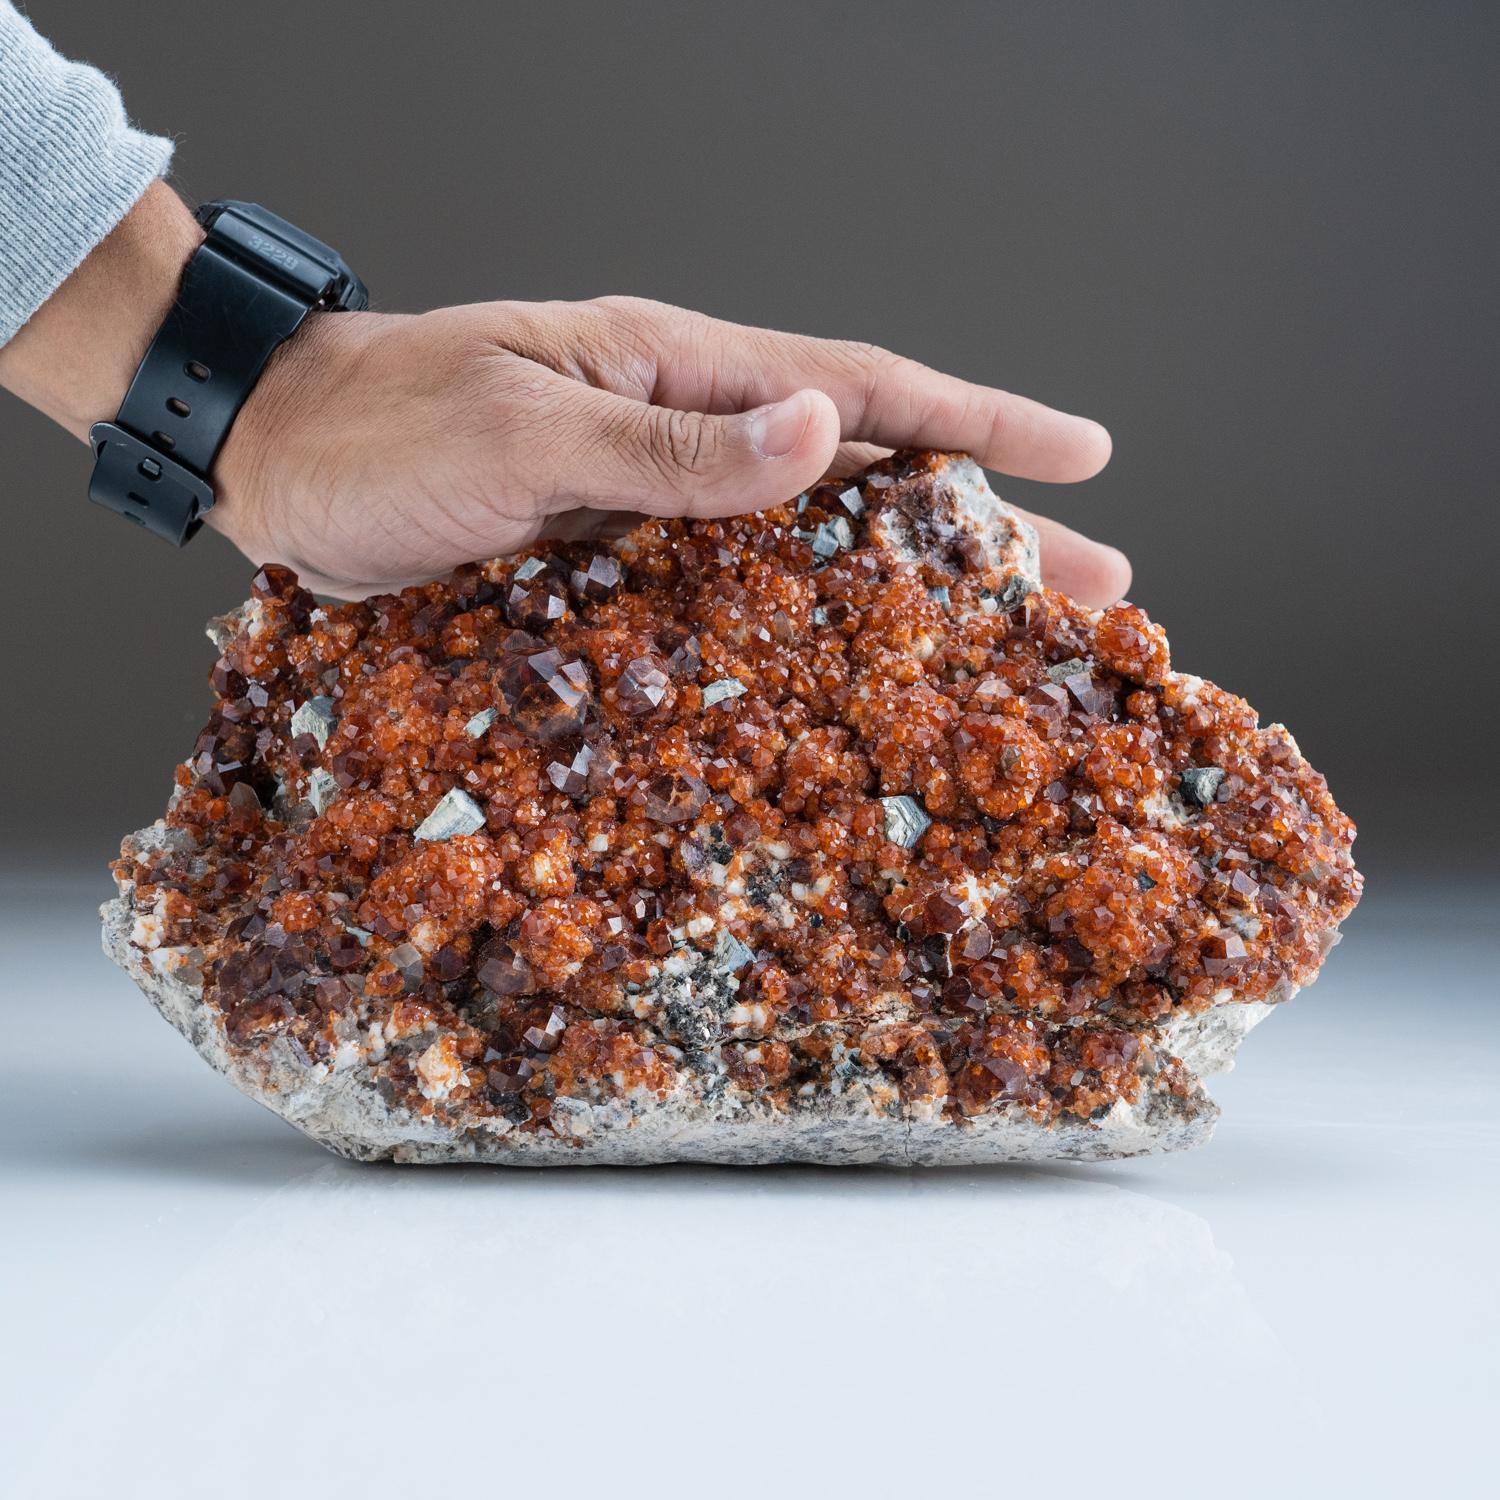 From Tongbei-Yunling District, Fujian Province, China

Translucent dark-red orange spessartine garnets on albite matrix with lustrous  translucent smoky quartz crystal cluster. The garnets are lustrous fully terminated in classic dodecahedron form